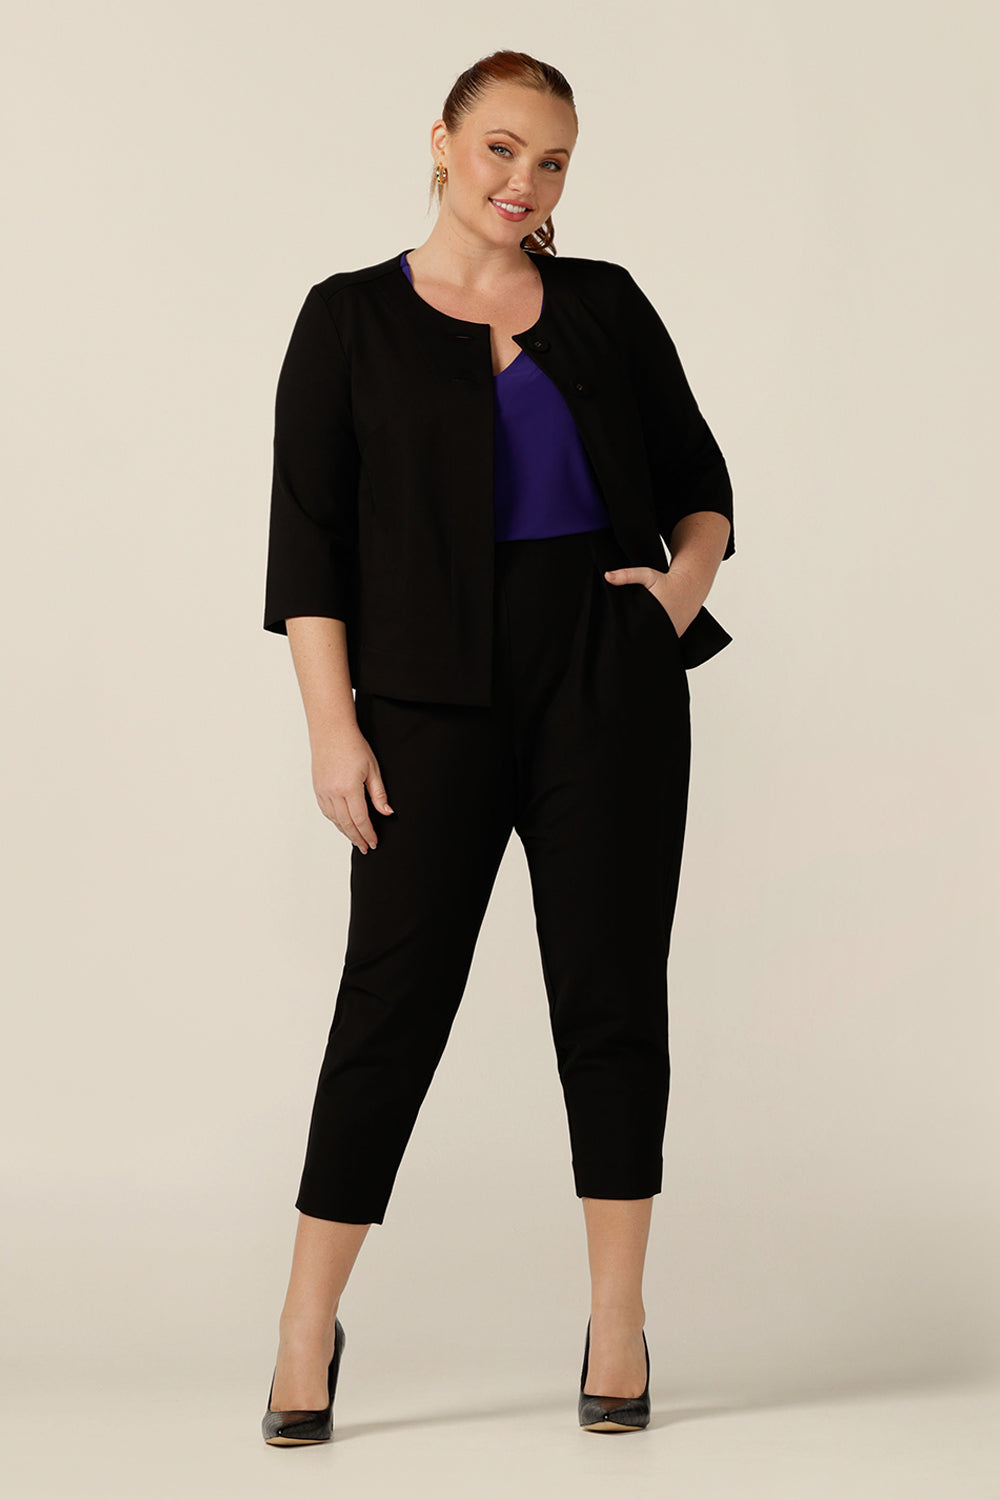 A size 12 woman wears a collarless black jacket with 3/4 sleeves over a purple jersey top and tapered-leg cropped black pants to create a work wear outfit. Cut for corporate comfort, this work jacket swings to the back and fits petite to plus size women.